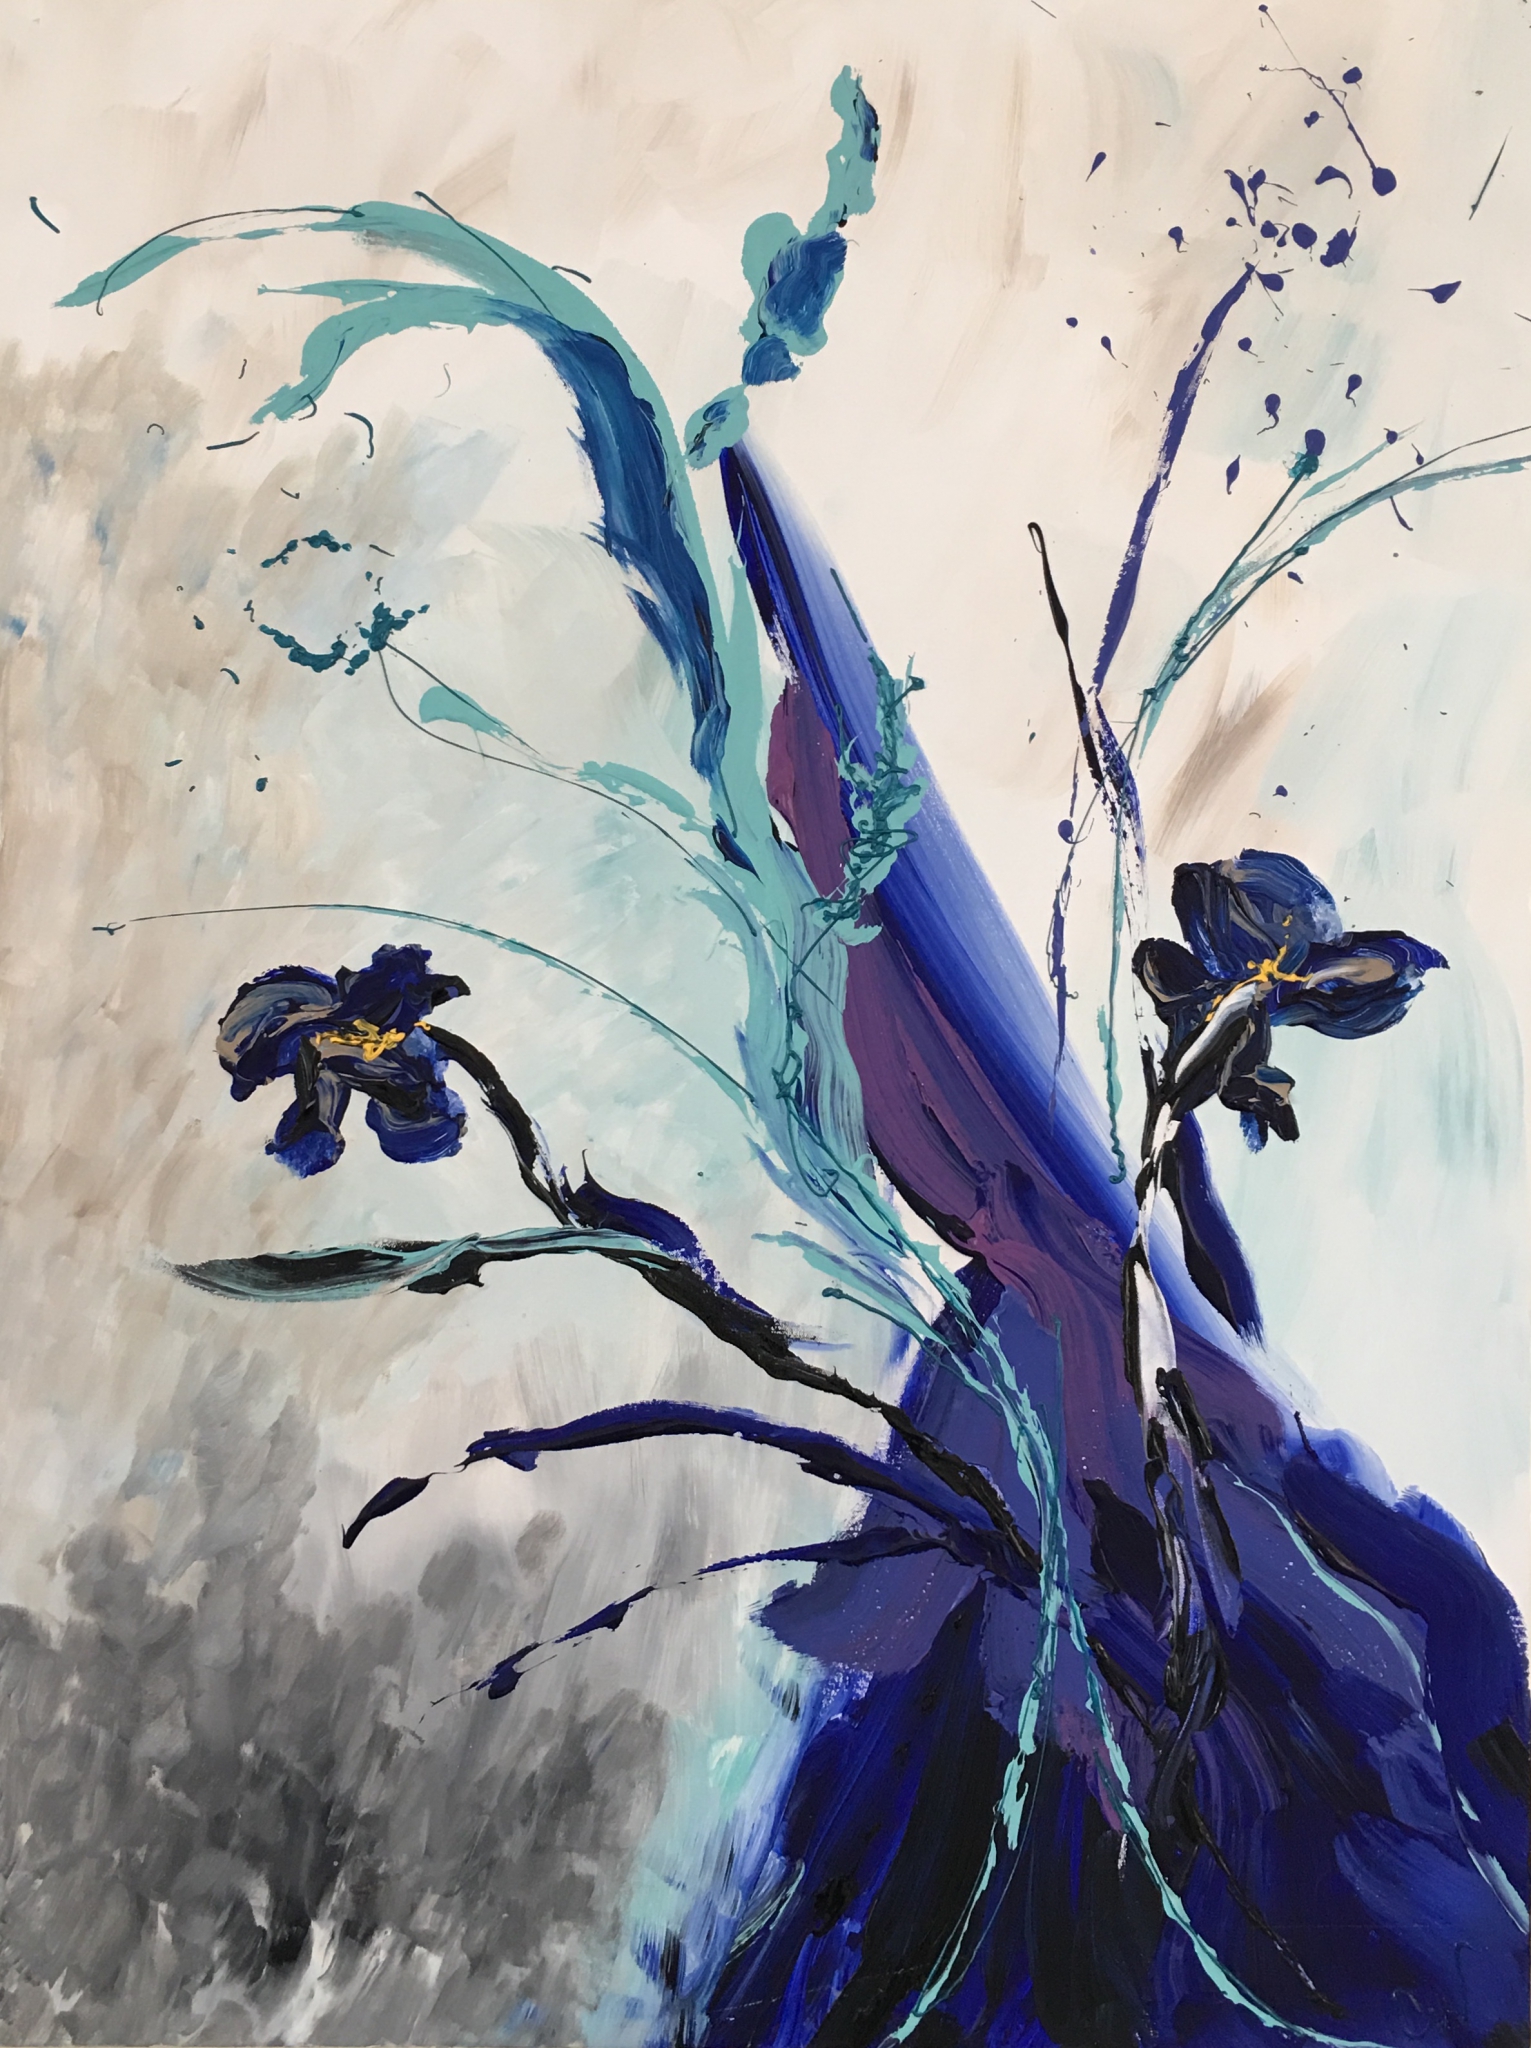 Click here to view A Splash of Irises by Carla Wormington